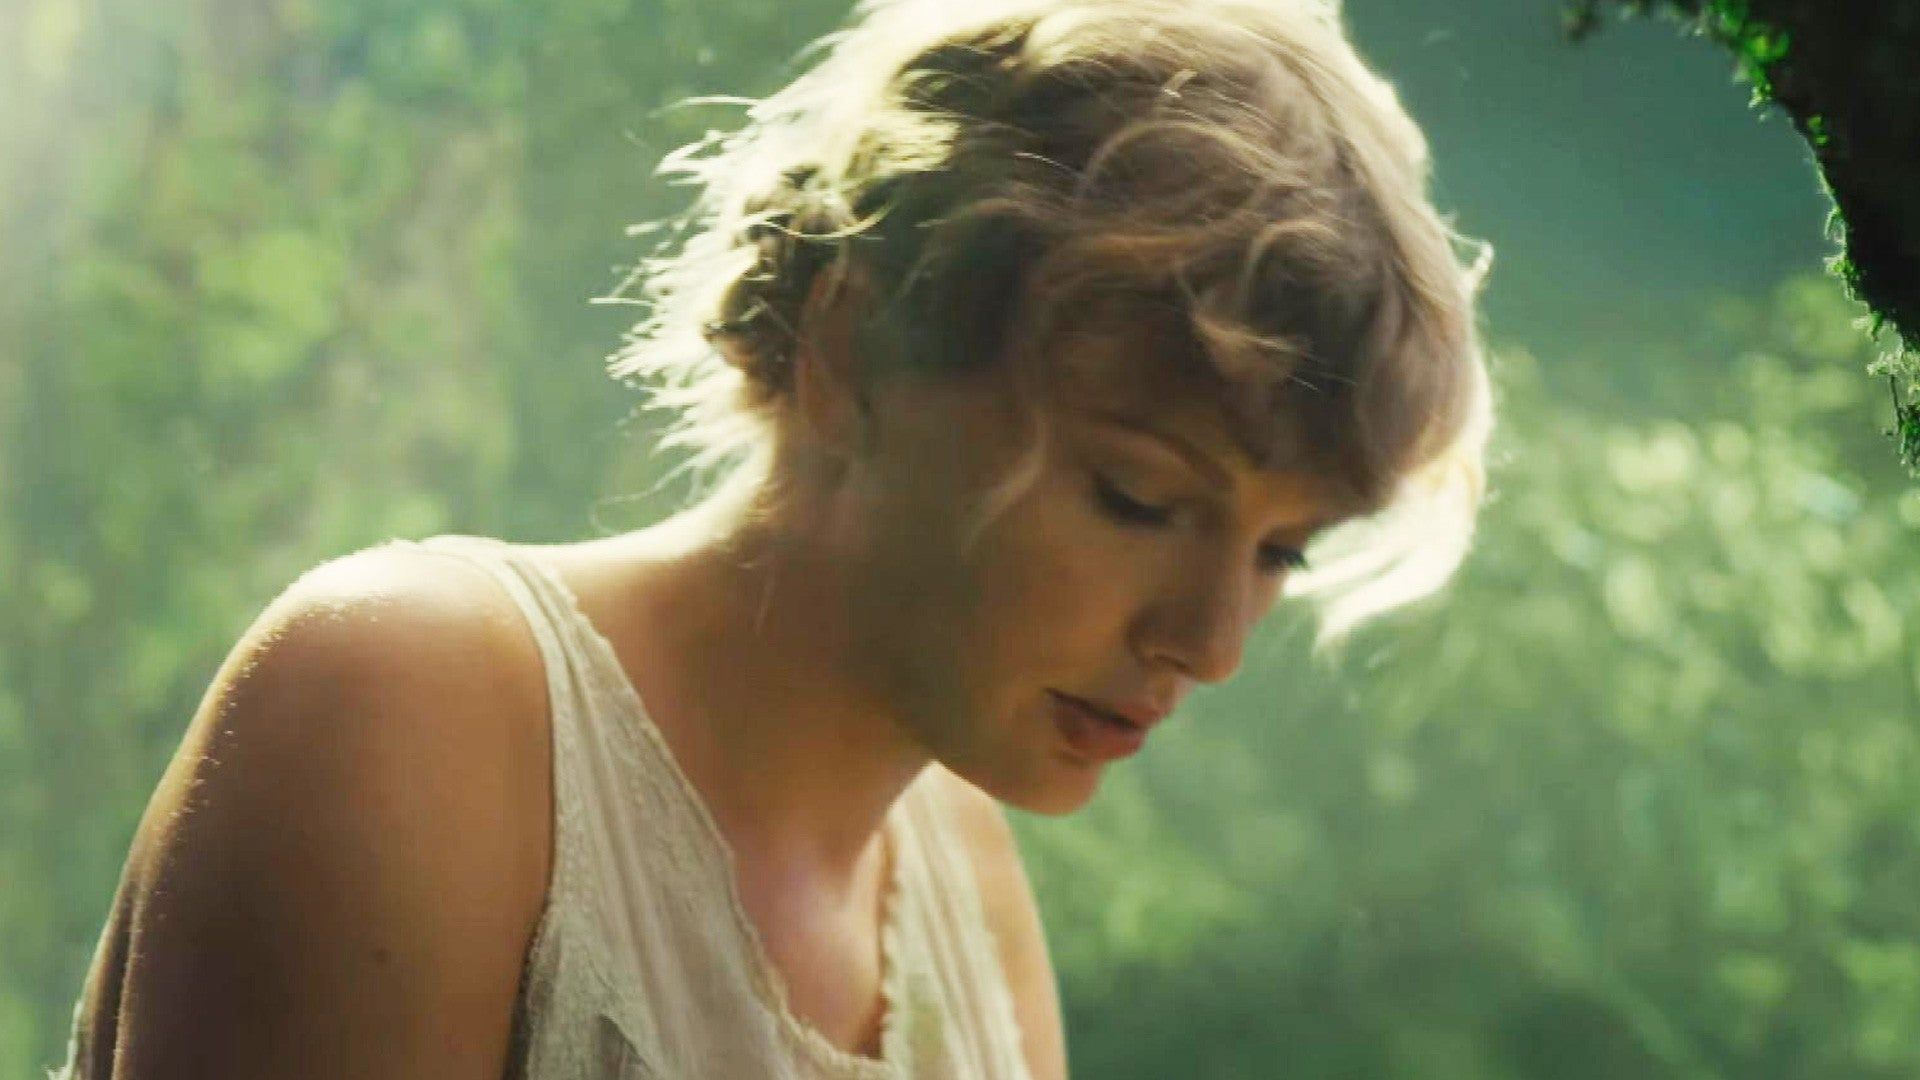 Inside Taylor Swift's 'Folklore': All the Lyrics, Easter Eggs and Wildest Fan Theories Decoded